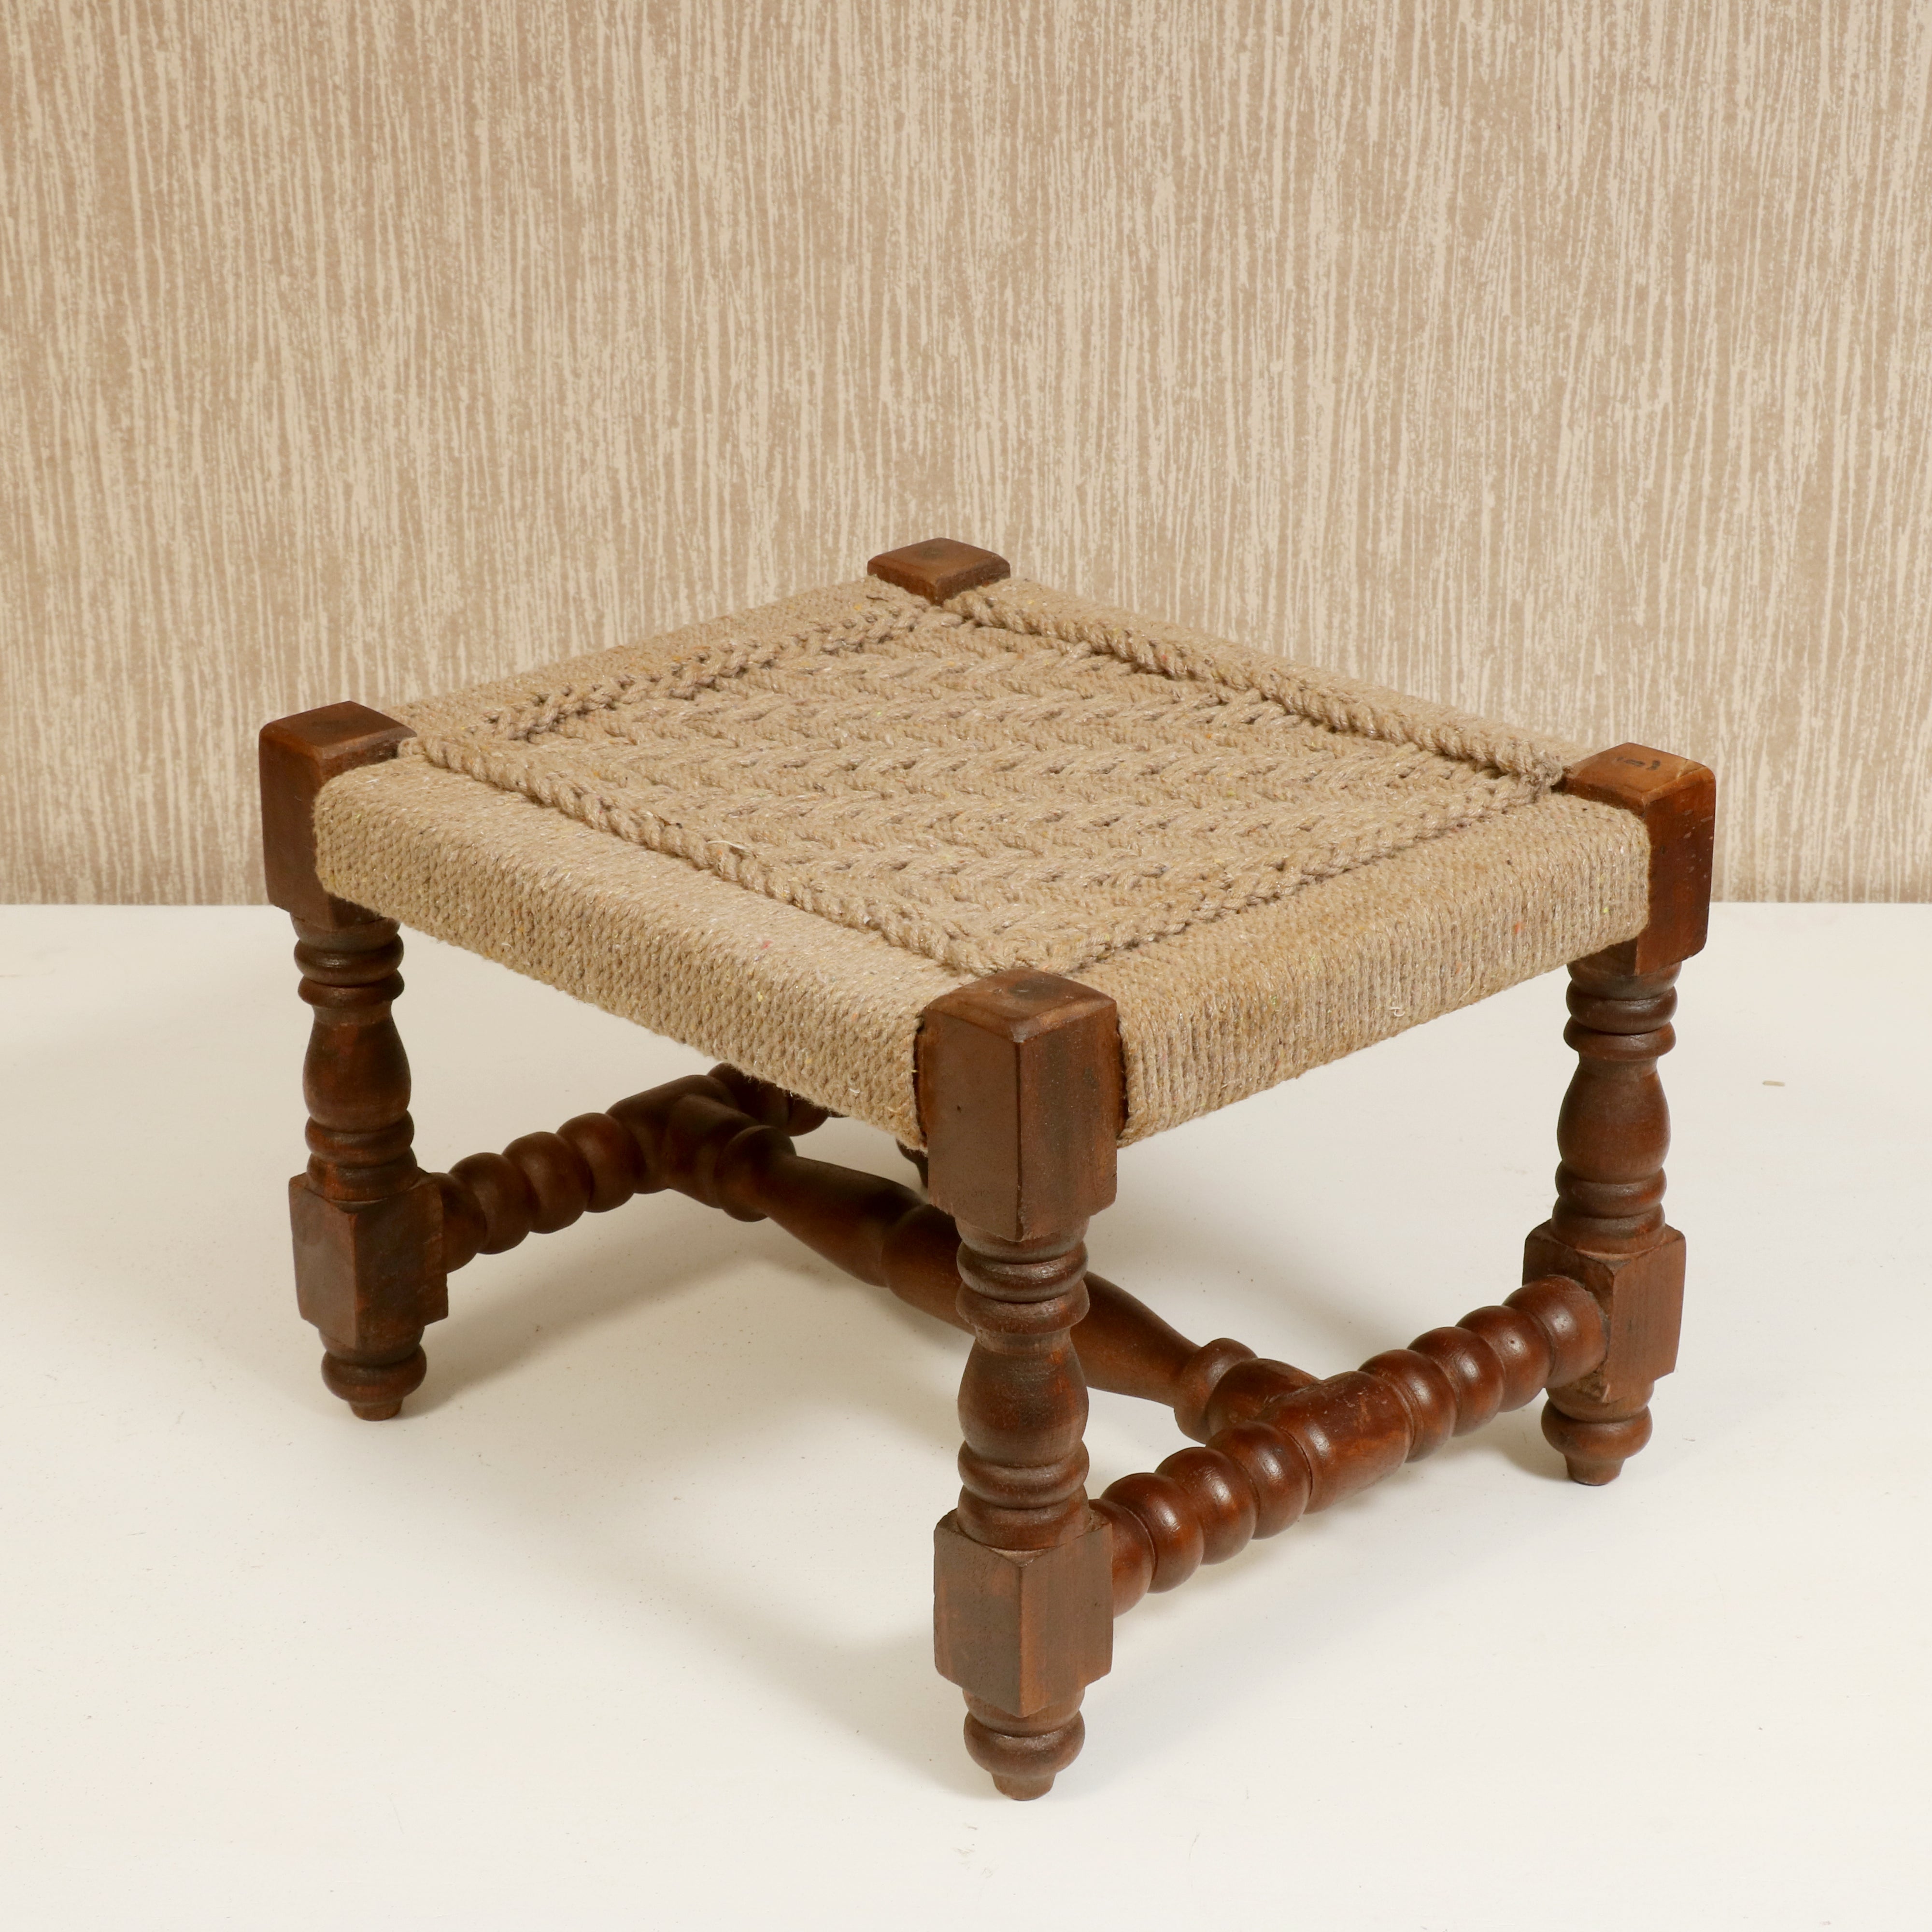 Woven Low Stool Stool